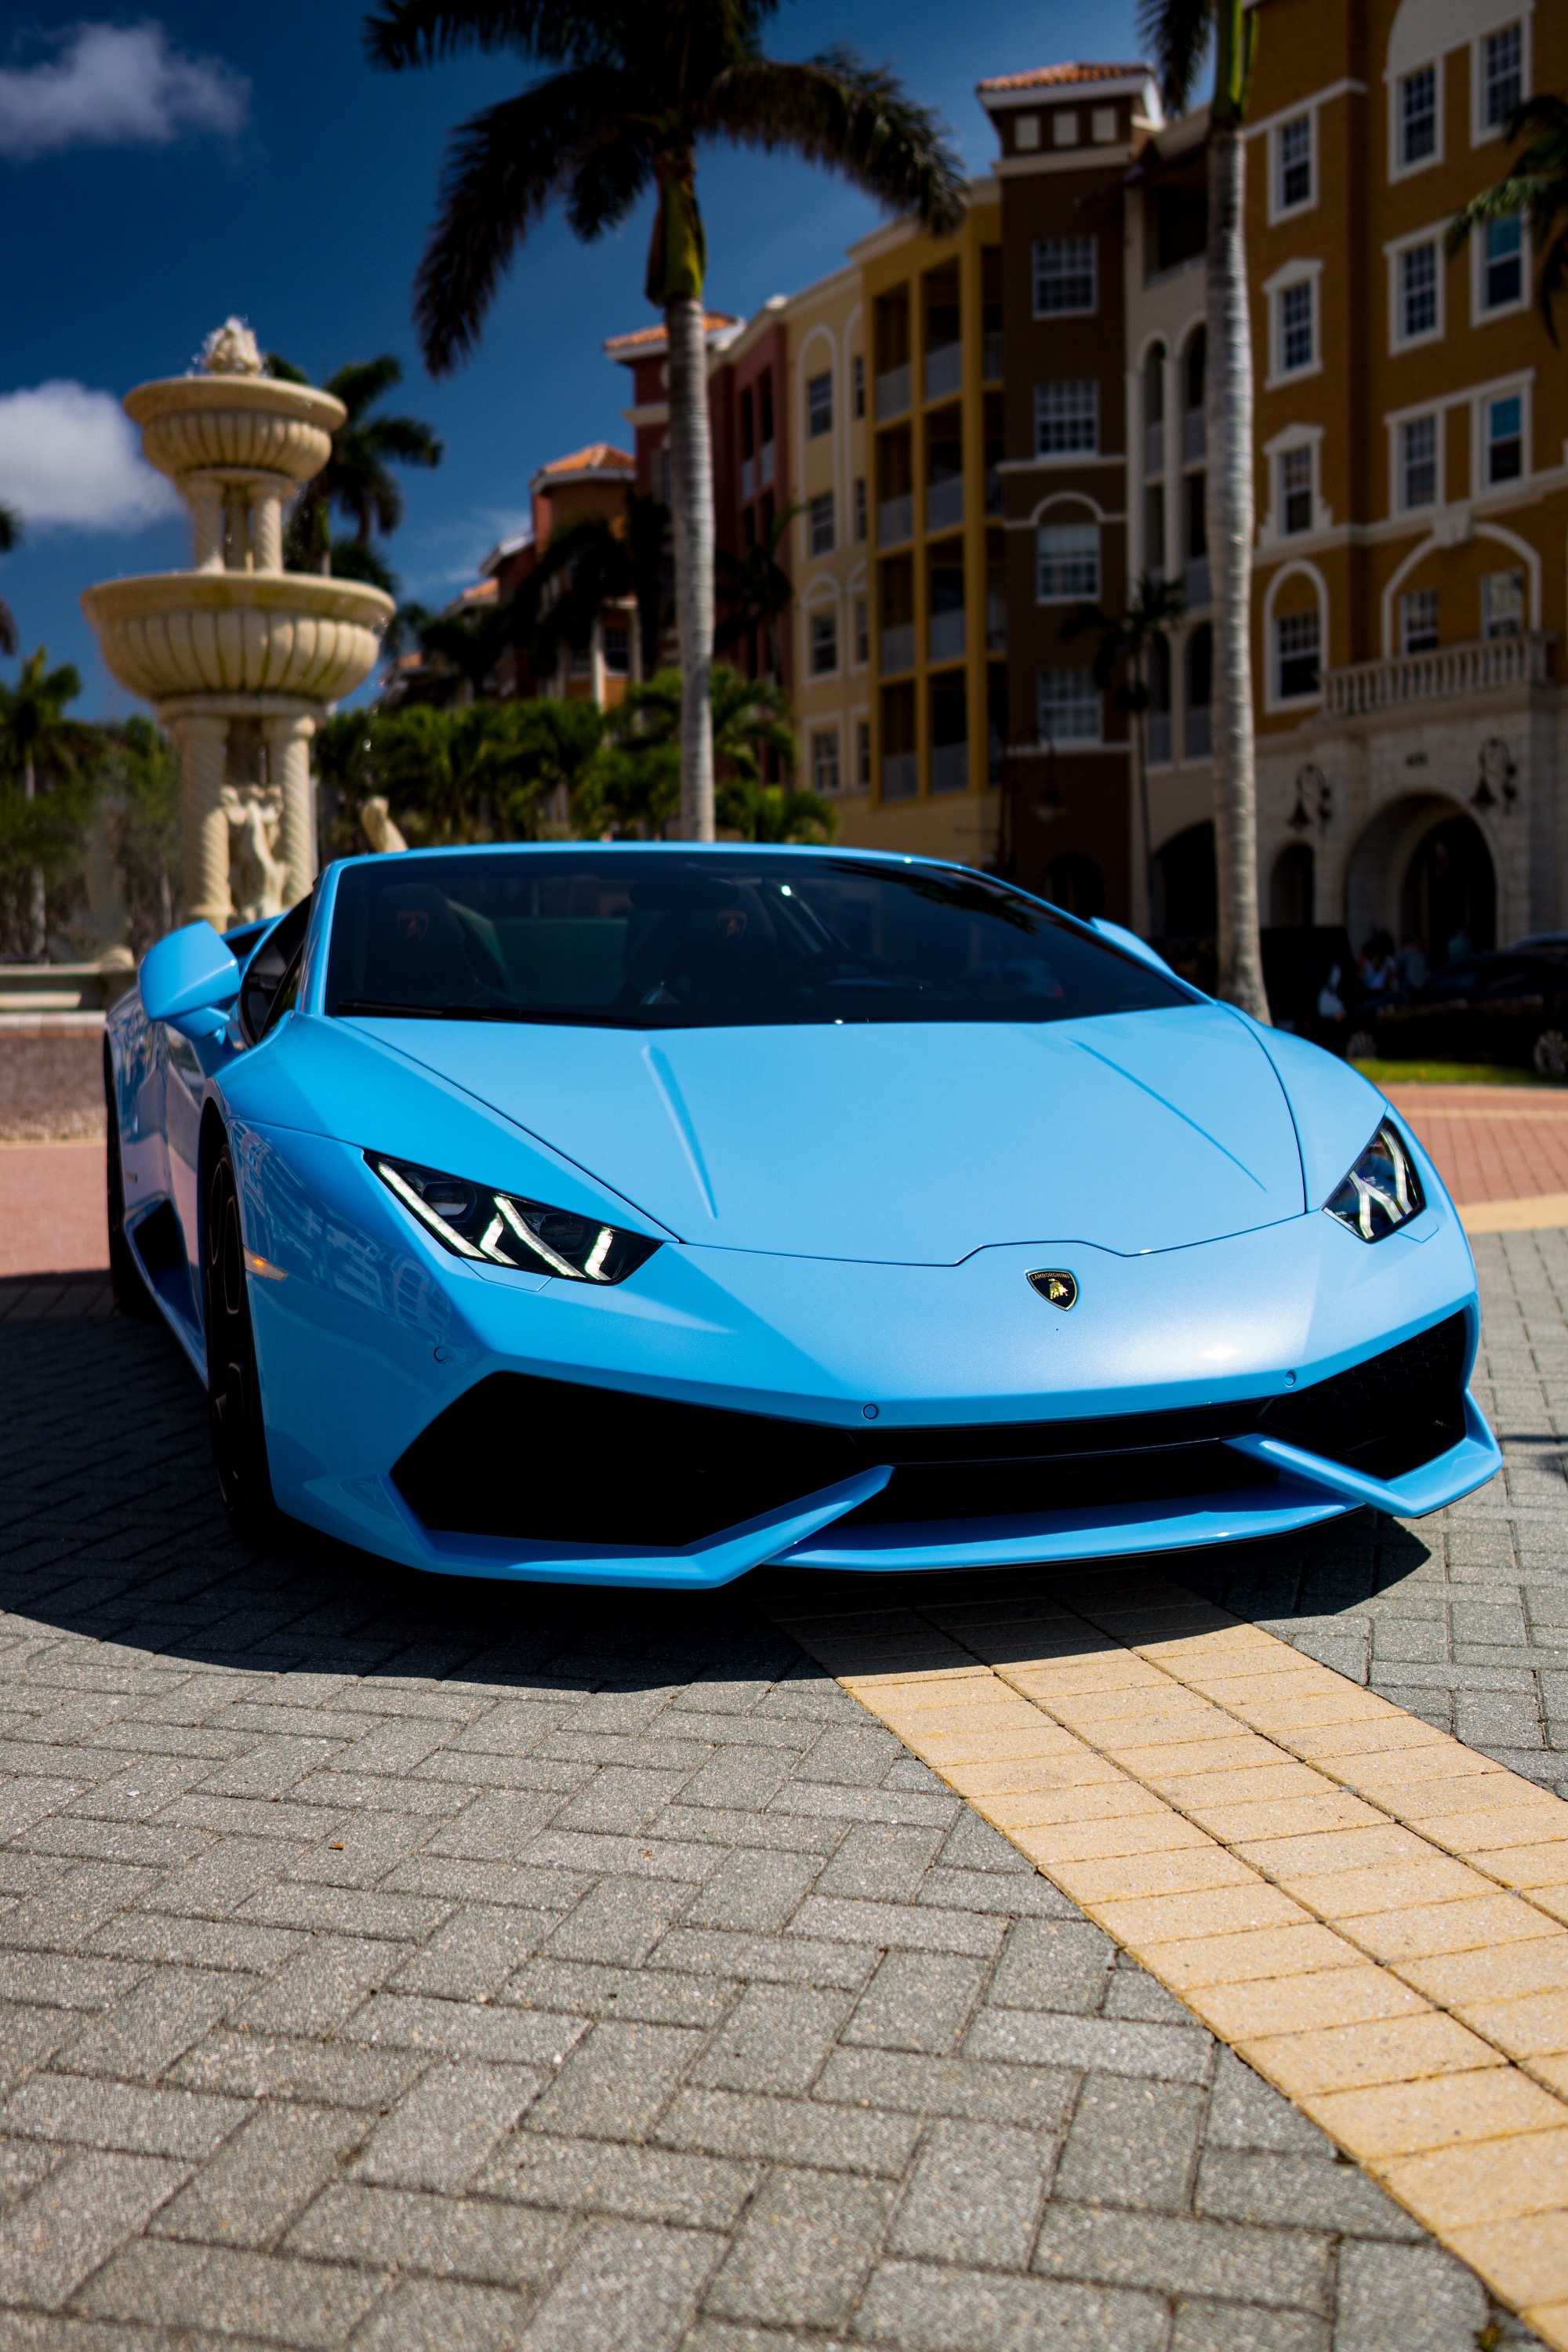 Lamborghini Huracan for Sale in Naples, FL (Test Drive at Home) - Kelley  Blue Book